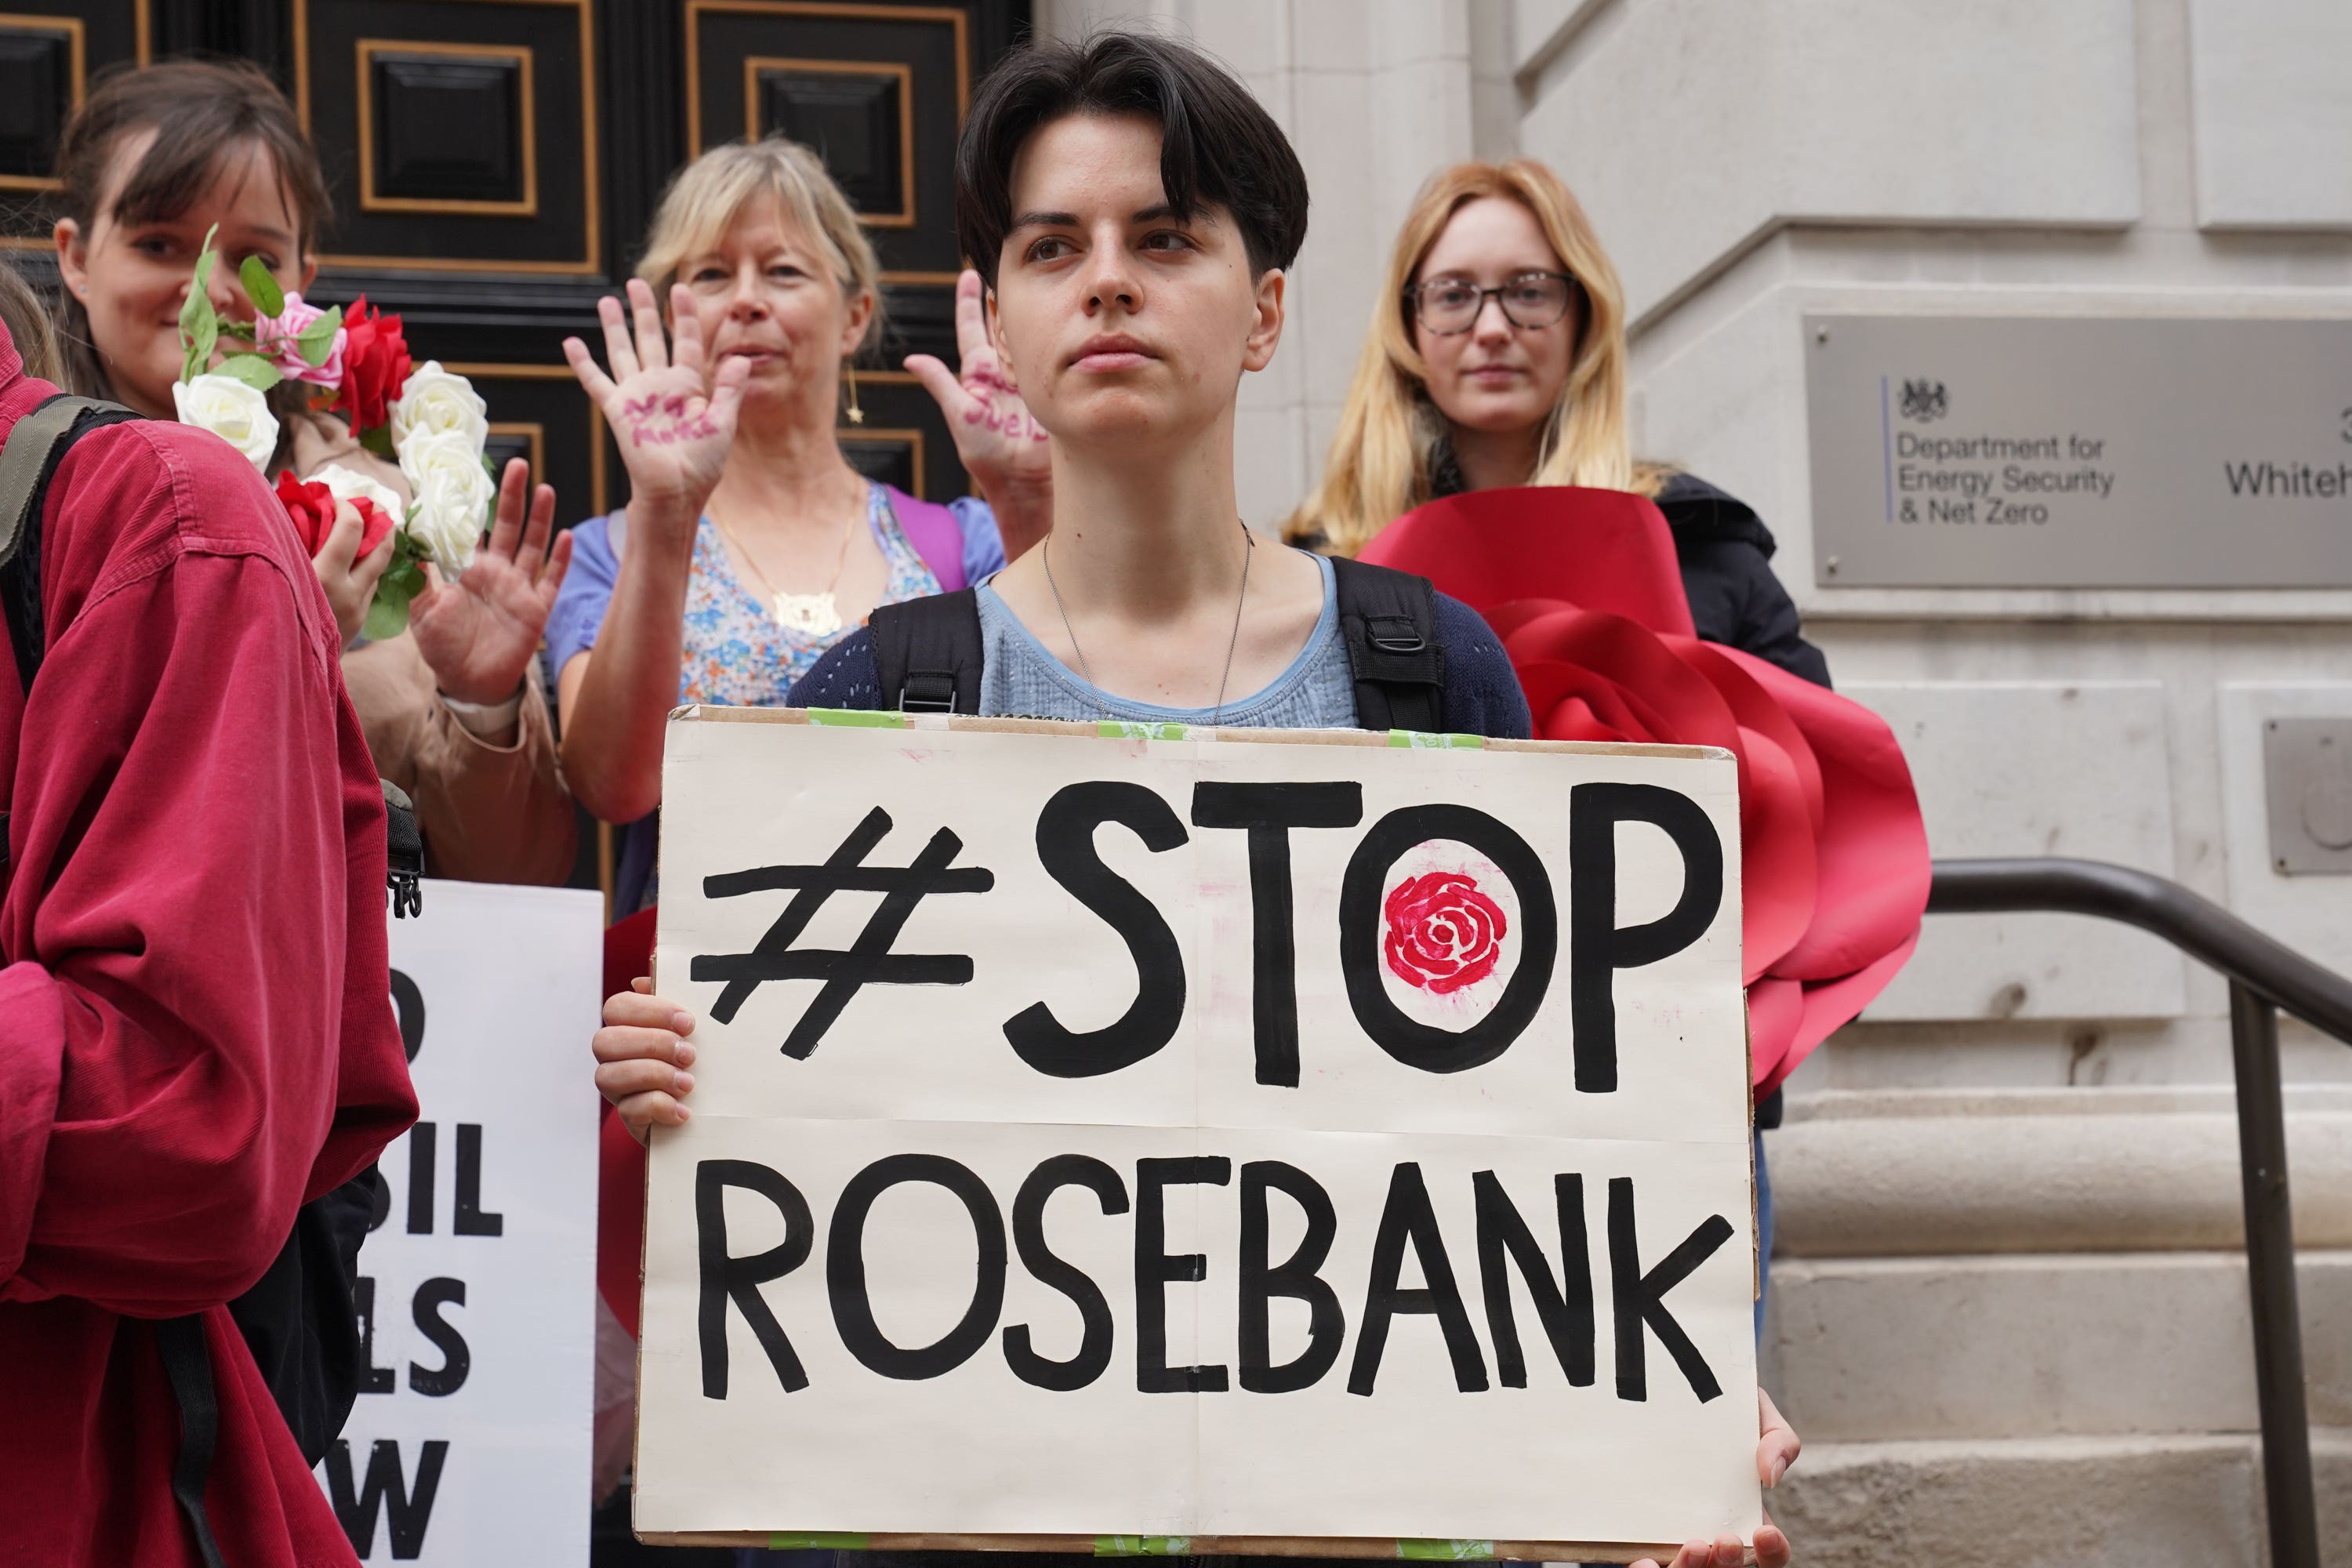 Rosebank has faced strong opposition from environmental campaigners